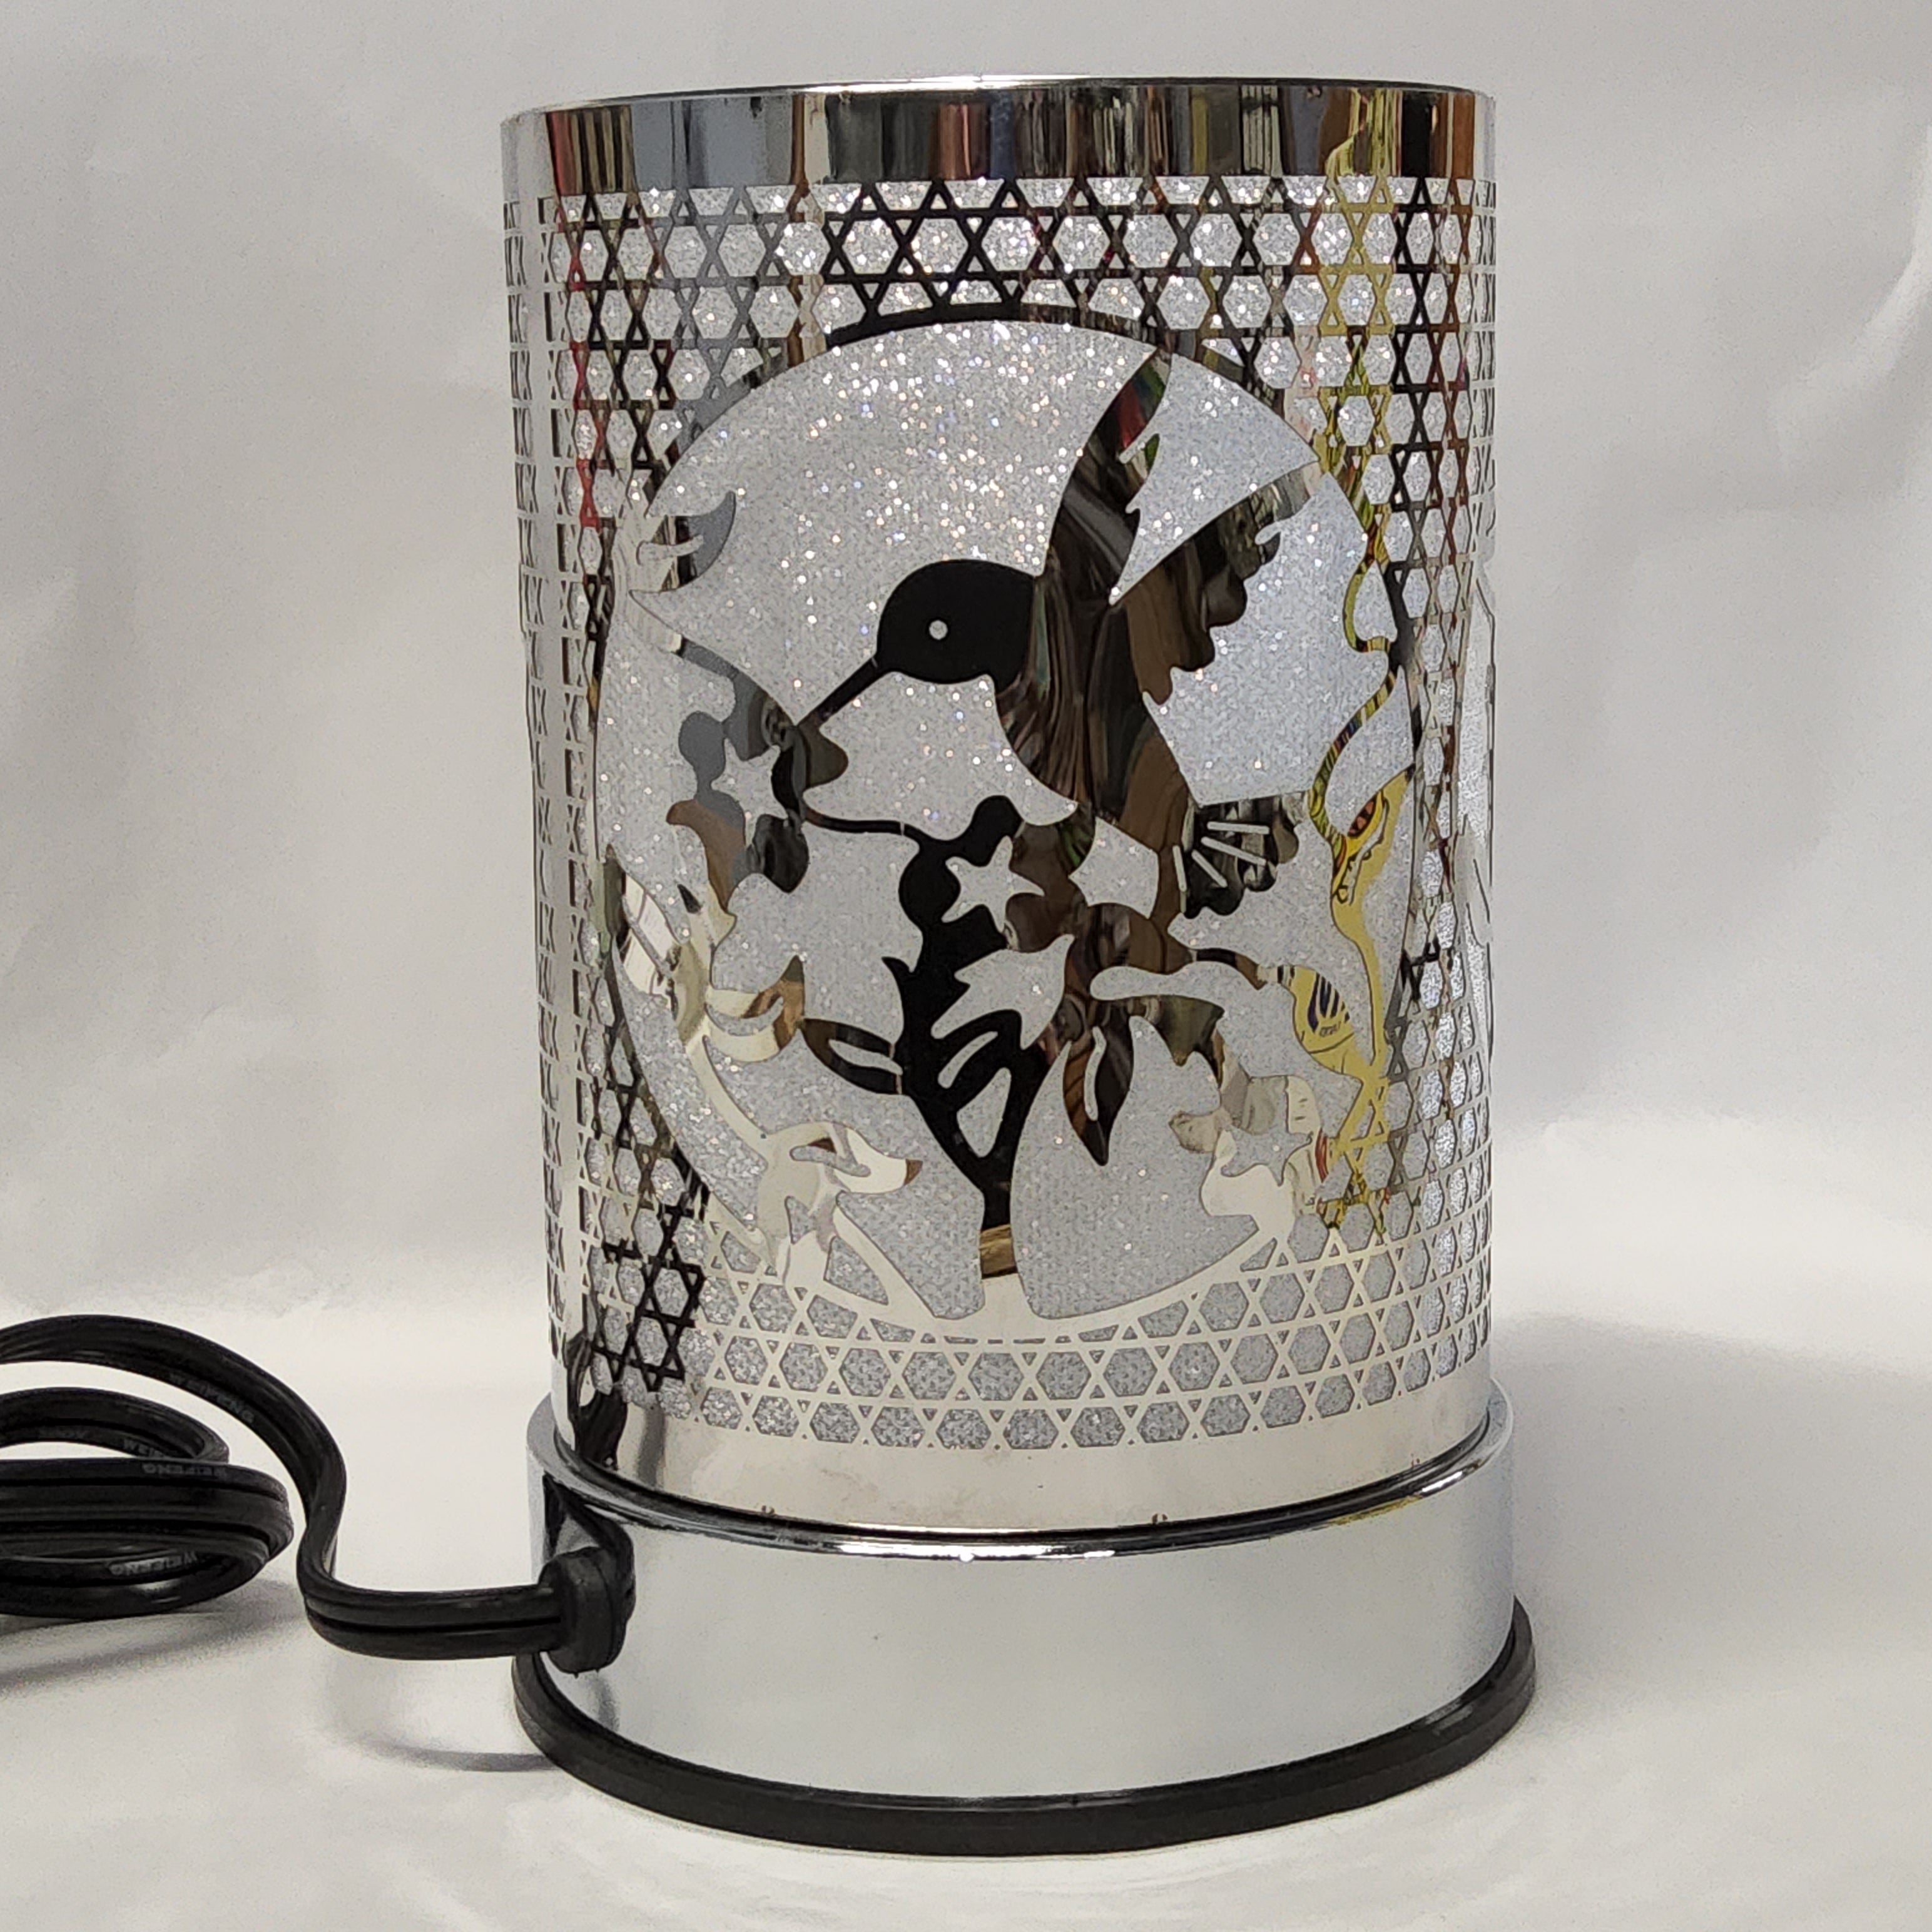 Touch Lamps - Assorted 7 inch tall designs